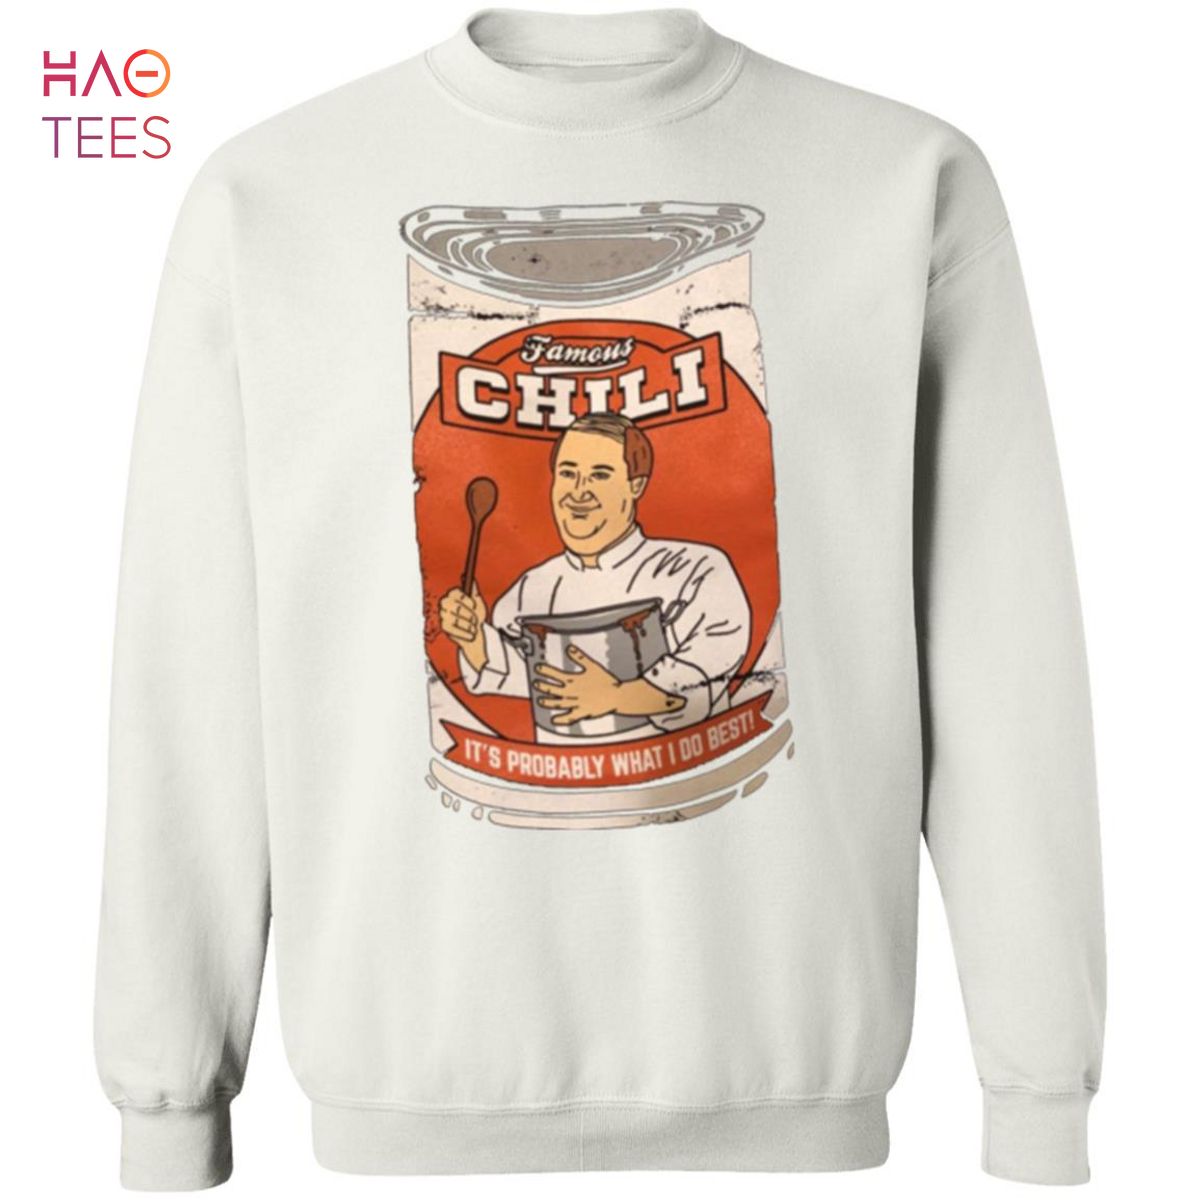 [NEW] Kevin Chili Sweater